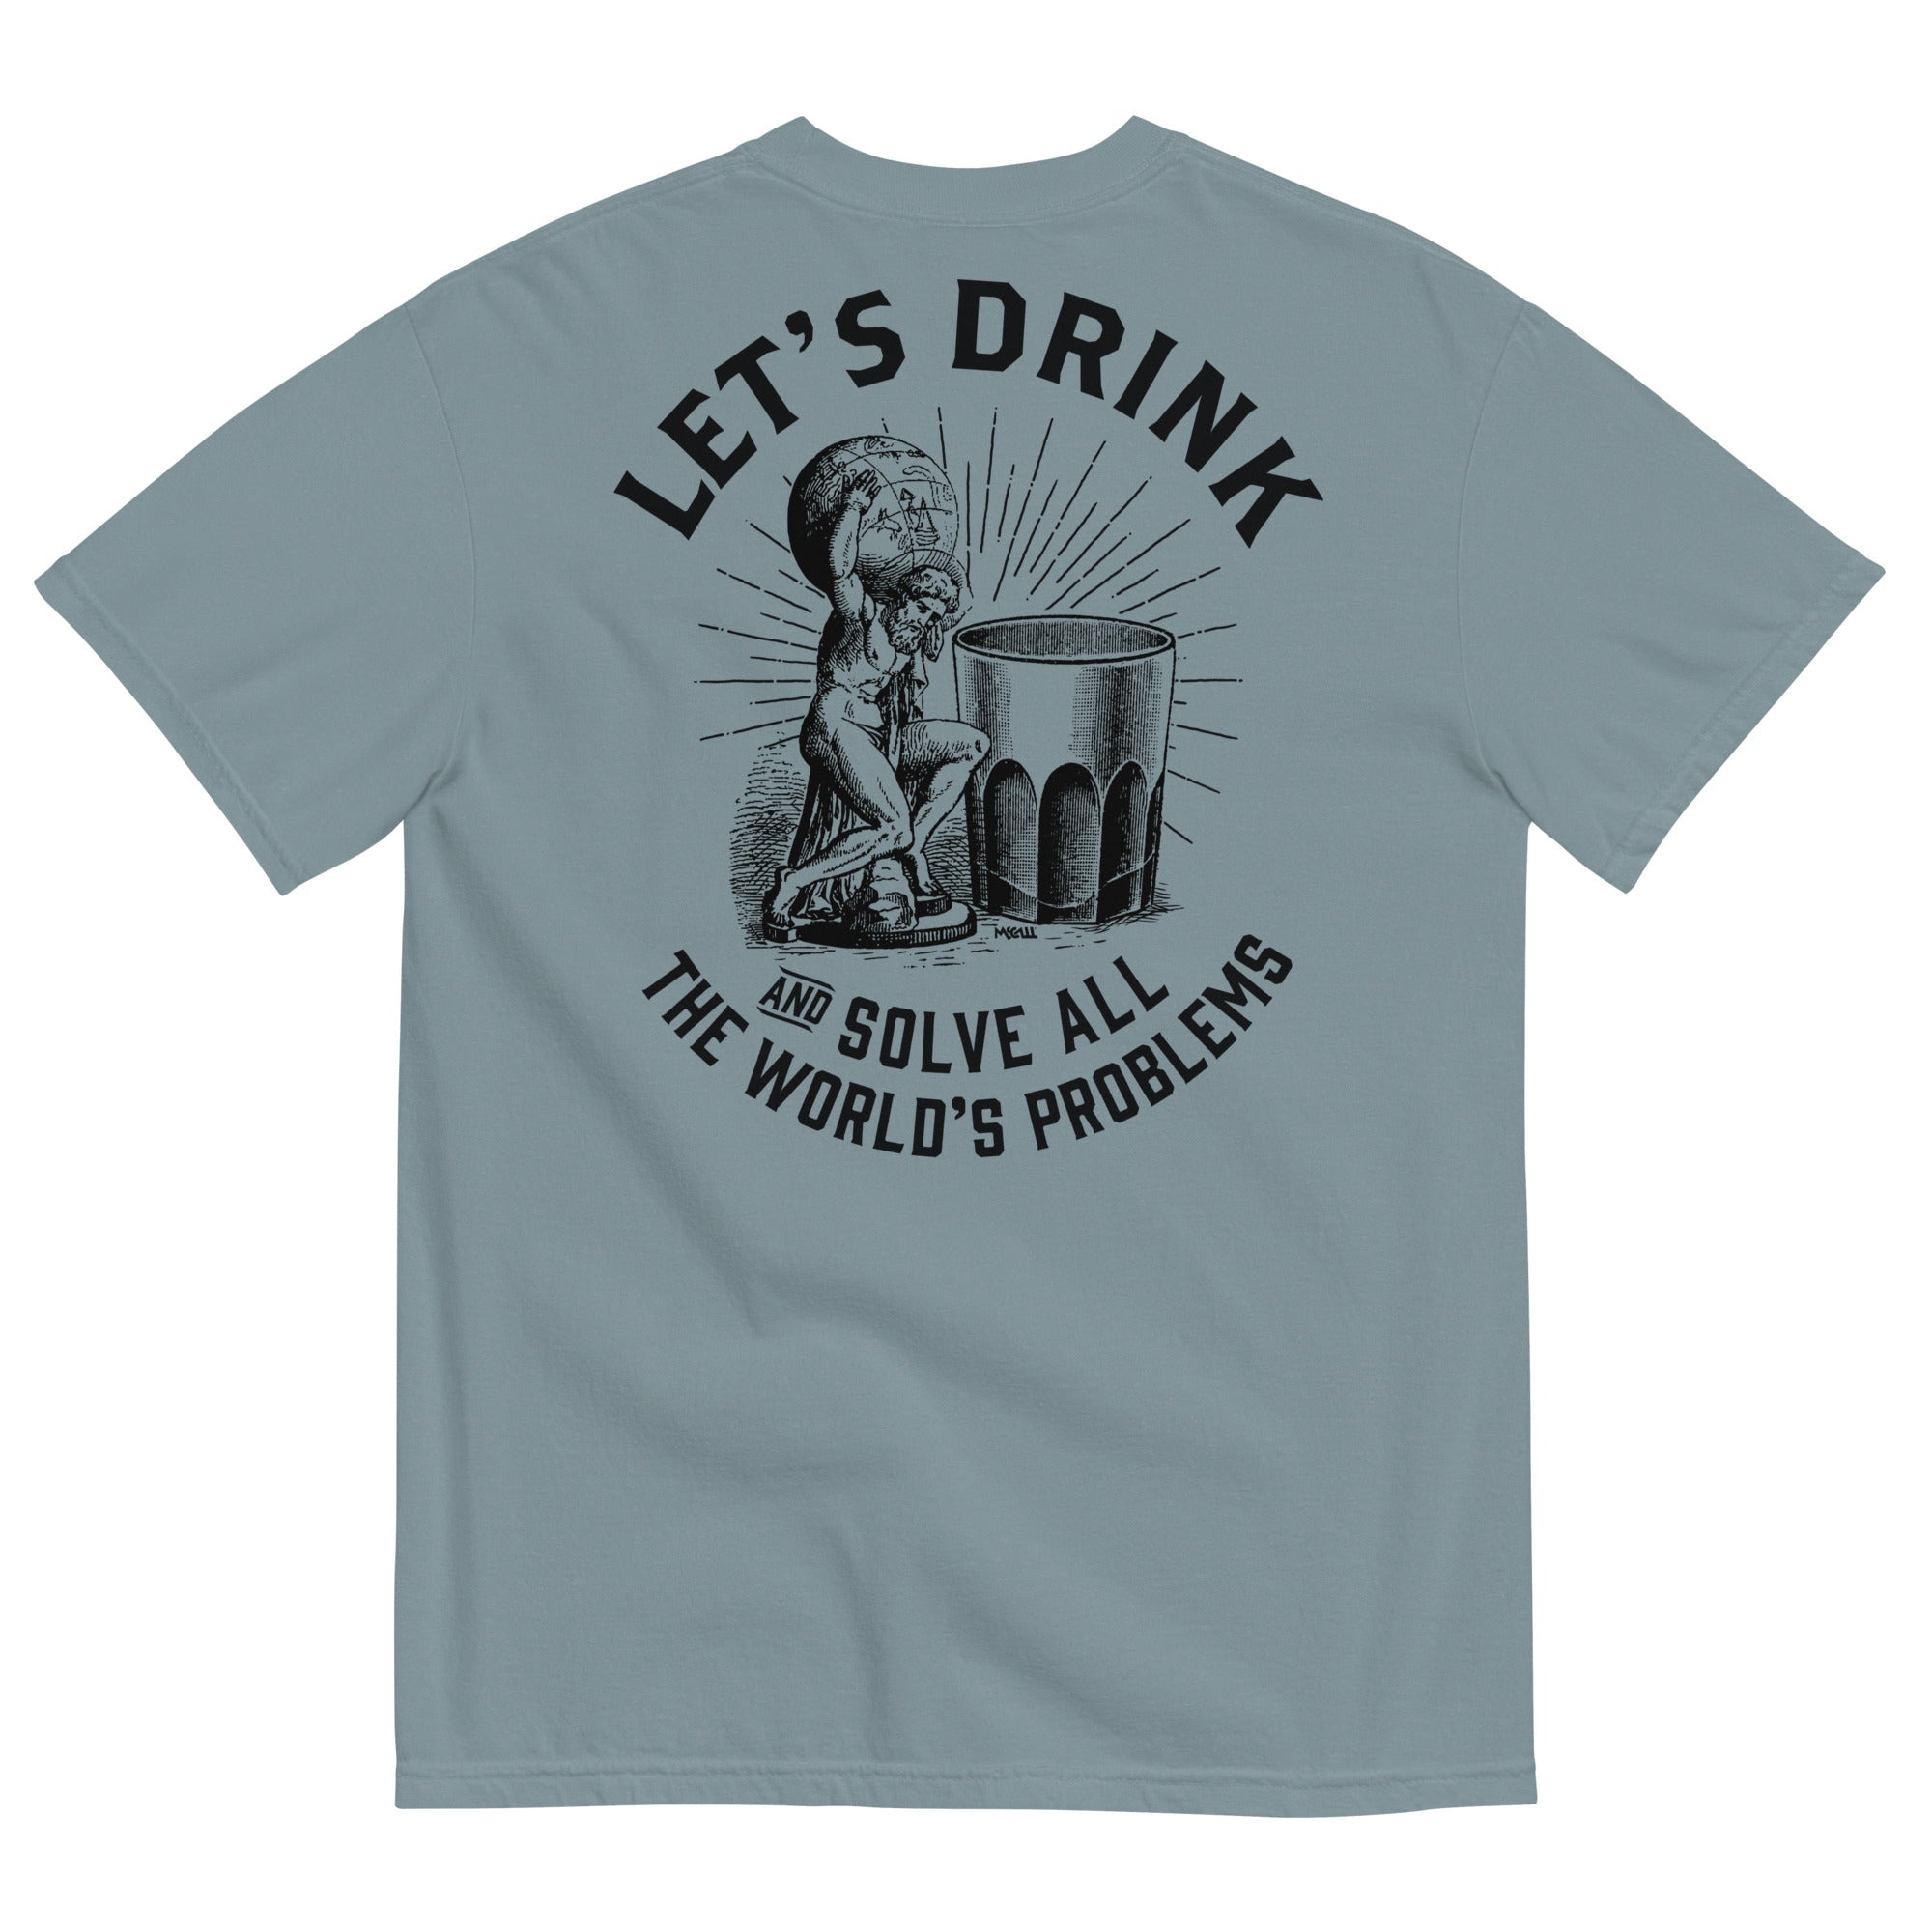 Let's Drink and Solve All the World's Problems Men’s Garment-dyed Heavyweight T-shirt